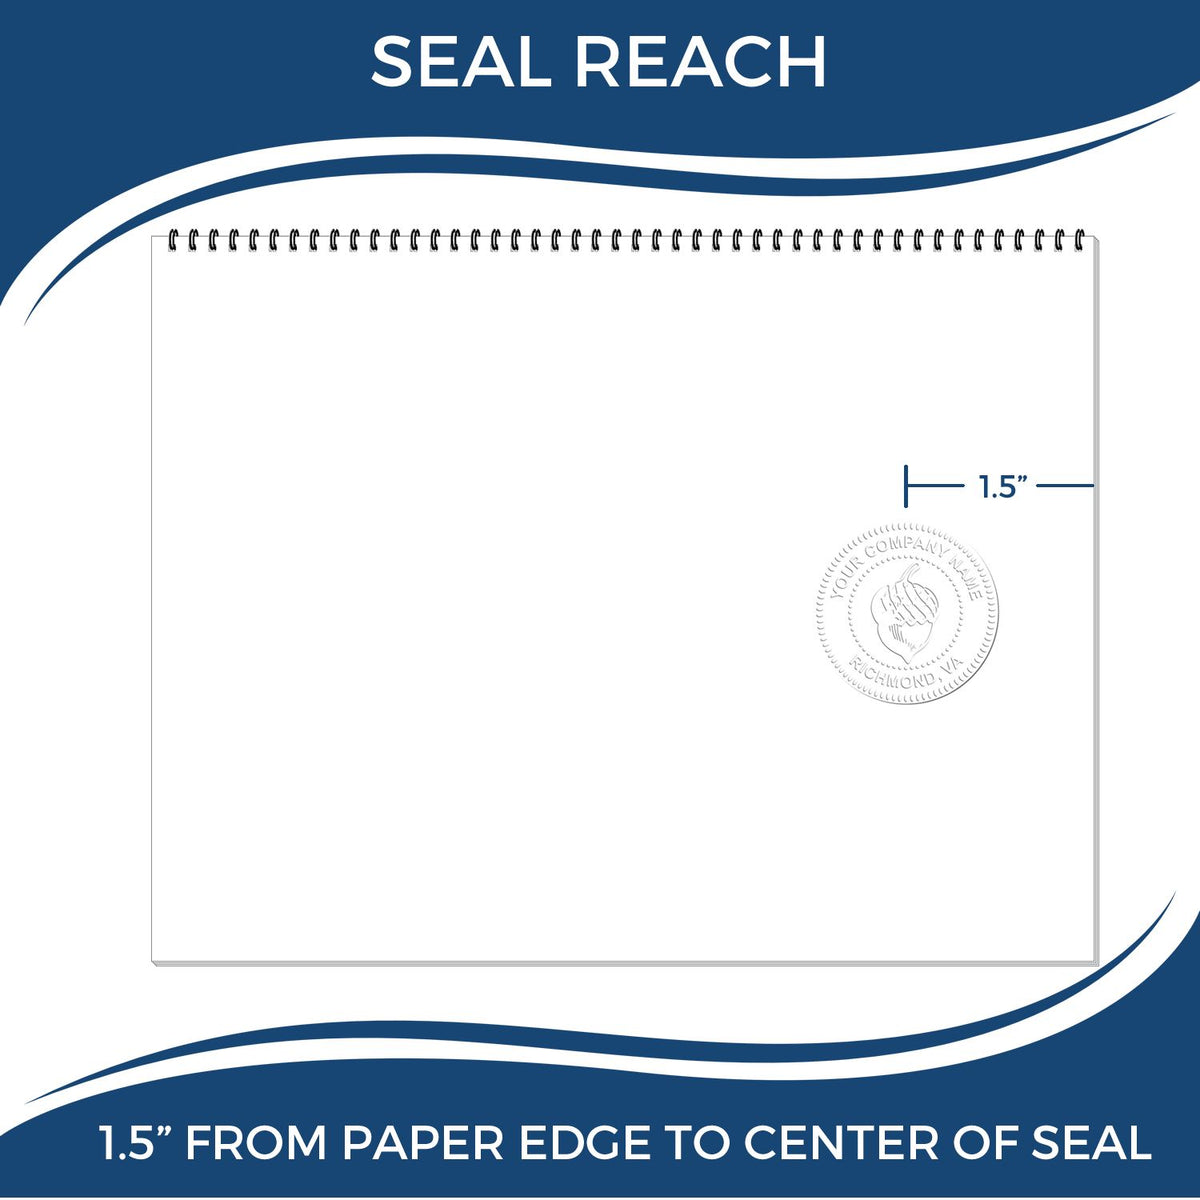 An infographic showing the seal reach which is represented by a ruler and a miniature seal image of the Handheld Illinois Architect Seal Embosser